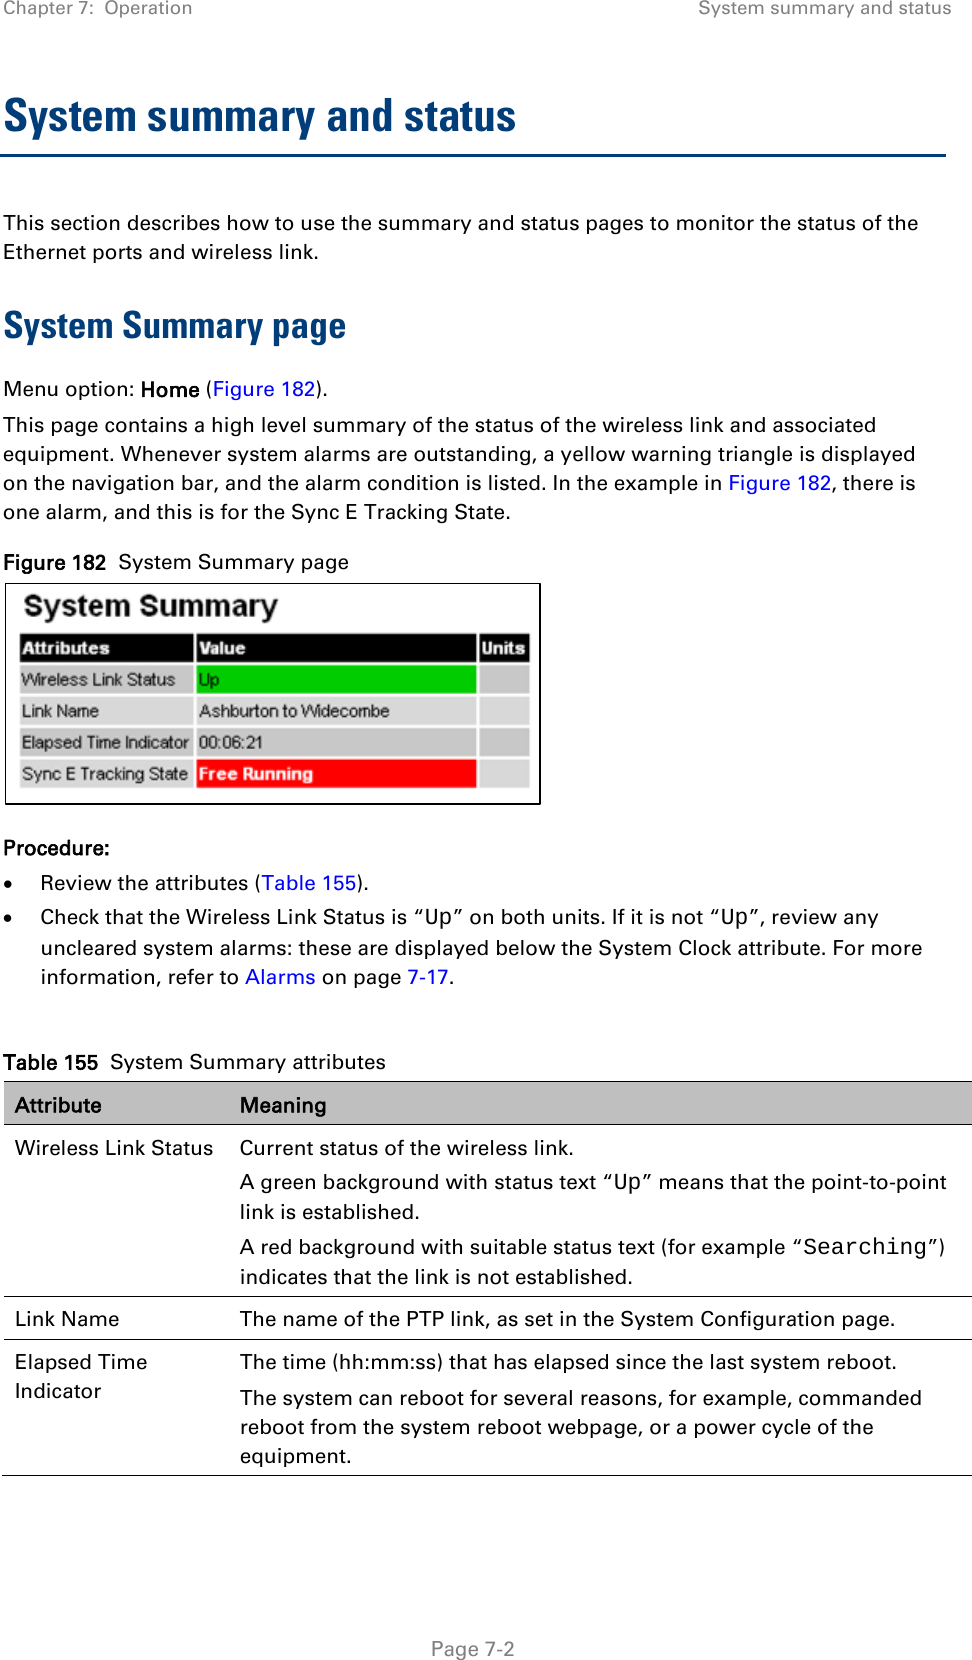 Chapter 7:  Operation System summary and status  System summary and status This section describes how to use the summary and status pages to monitor the status of the Ethernet ports and wireless link. System Summary page Menu option: Home (Figure 182). This page contains a high level summary of the status of the wireless link and associated equipment. Whenever system alarms are outstanding, a yellow warning triangle is displayed on the navigation bar, and the alarm condition is listed. In the example in Figure 182, there is one alarm, and this is for the Sync E Tracking State. Figure 182  System Summary page  Procedure: • Review the attributes (Table 155). • Check that the Wireless Link Status is “Up” on both units. If it is not “Up”, review any uncleared system alarms: these are displayed below the System Clock attribute. For more information, refer to Alarms on page 7-17.  Table 155  System Summary attributes Attribute Meaning Wireless Link Status Current status of the wireless link.  A green background with status text “Up” means that the point-to-point link is established. A red background with suitable status text (for example “Searching”) indicates that the link is not established.  Link Name The name of the PTP link, as set in the System Configuration page.  Elapsed Time Indicator The time (hh:mm:ss) that has elapsed since the last system reboot. The system can reboot for several reasons, for example, commanded reboot from the system reboot webpage, or a power cycle of the equipment.  Page 7-2 